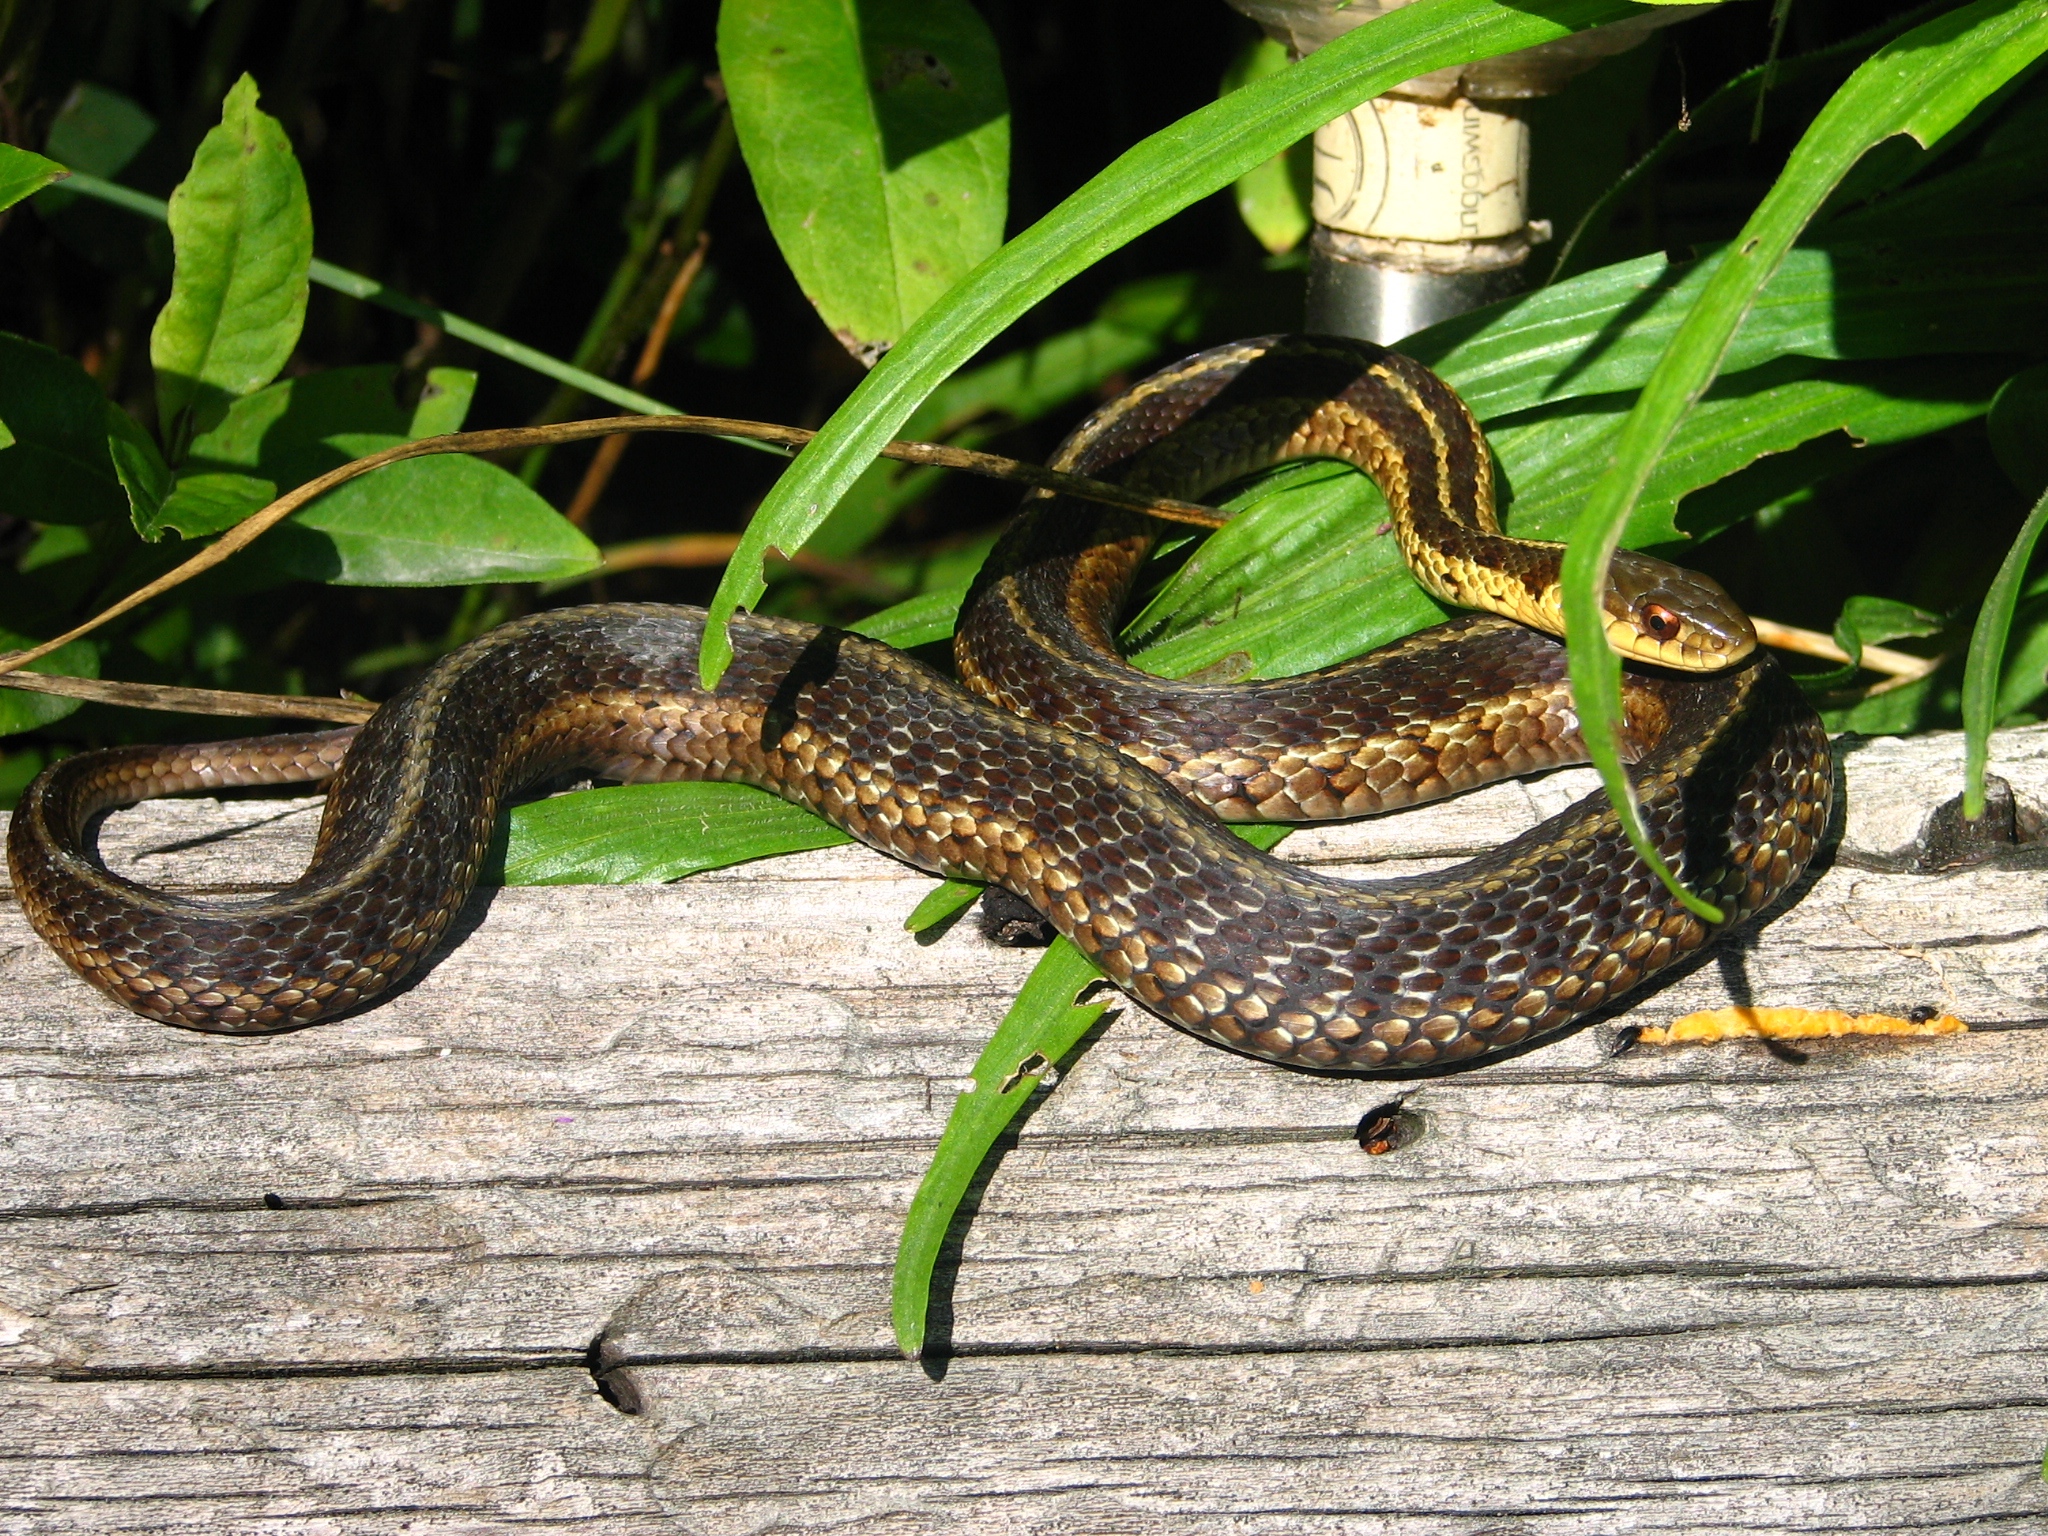 Snake from Wikimedia Commons